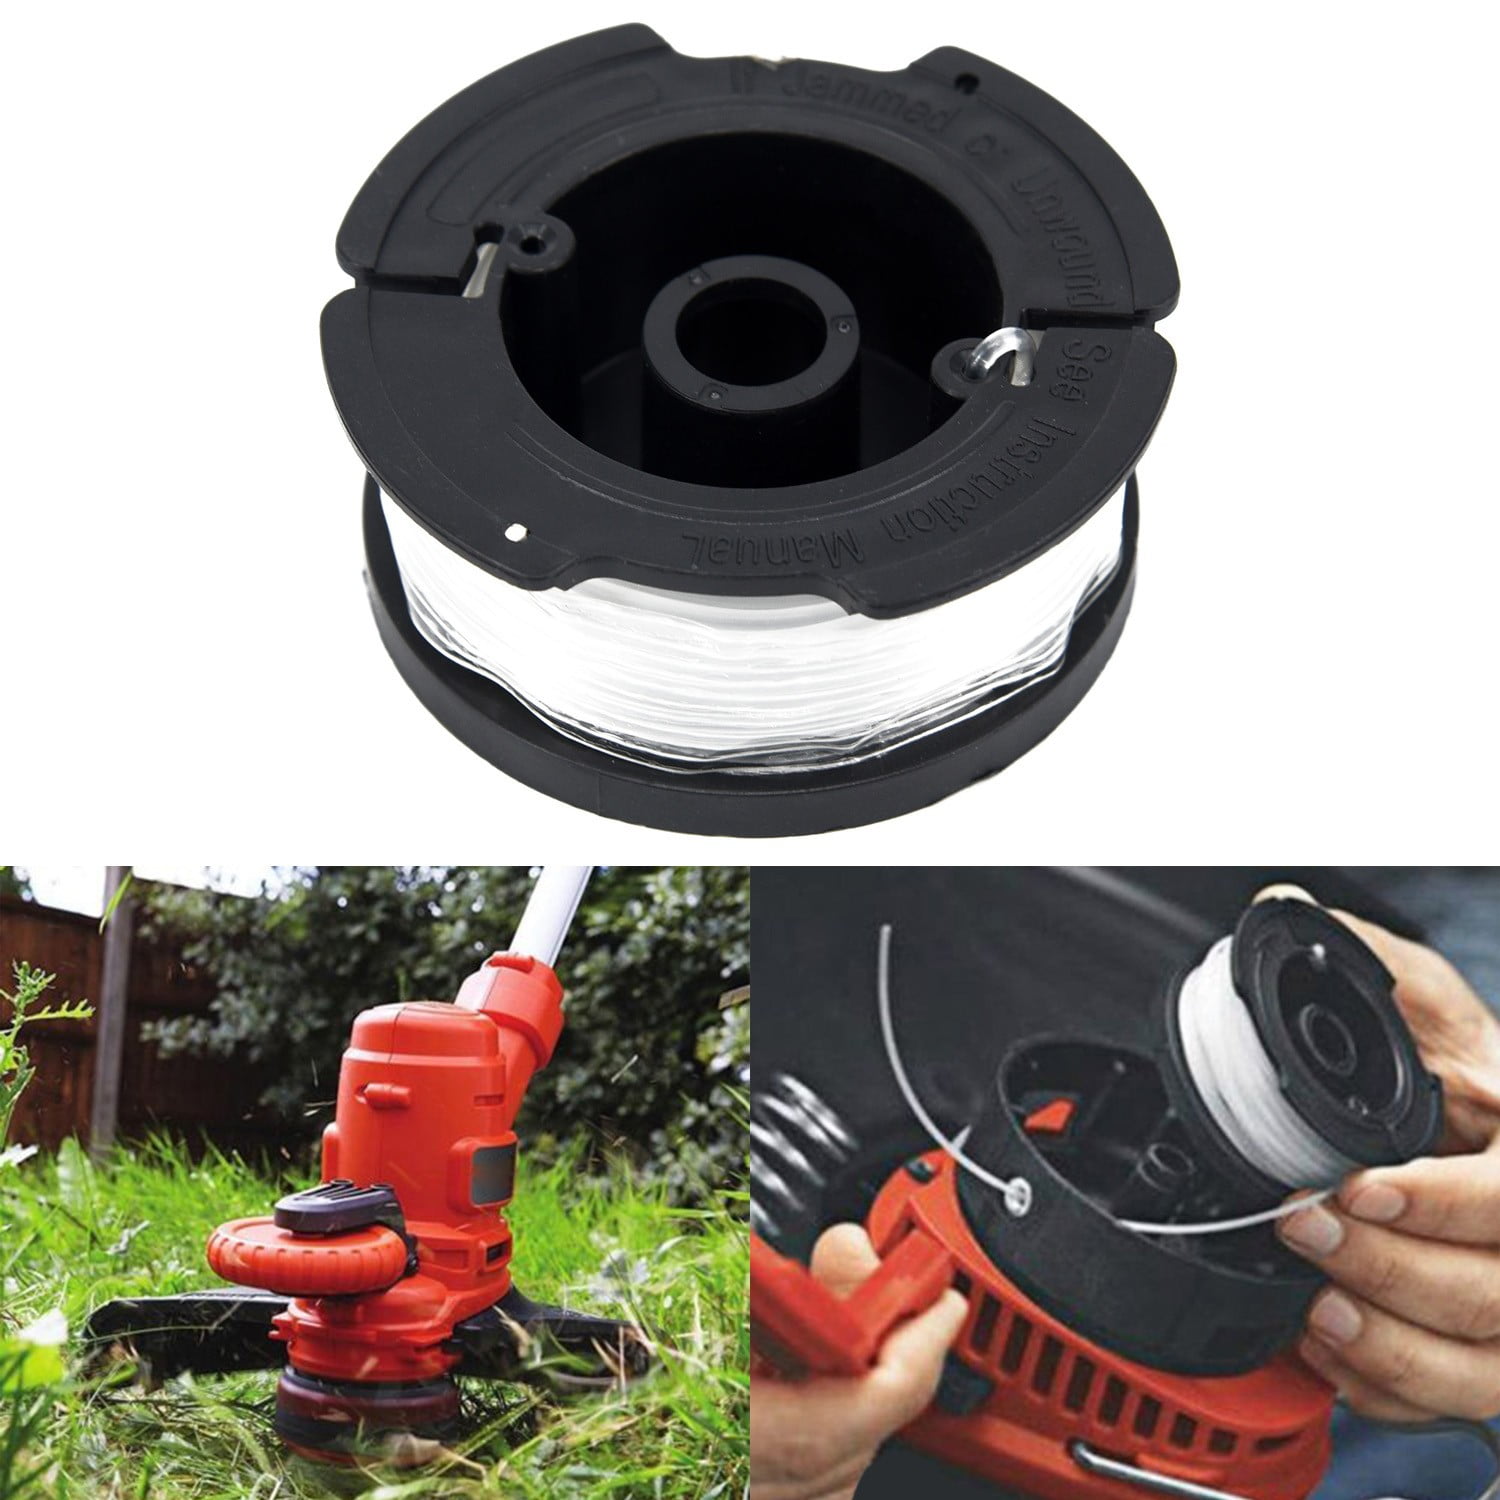 USA-Supply Premium Weed Eater Spools Compatible with Black & Decker Af-100 .065 5pcs 30ft 0.065 inch Trimmer Line and Spool Cap Cover for Black